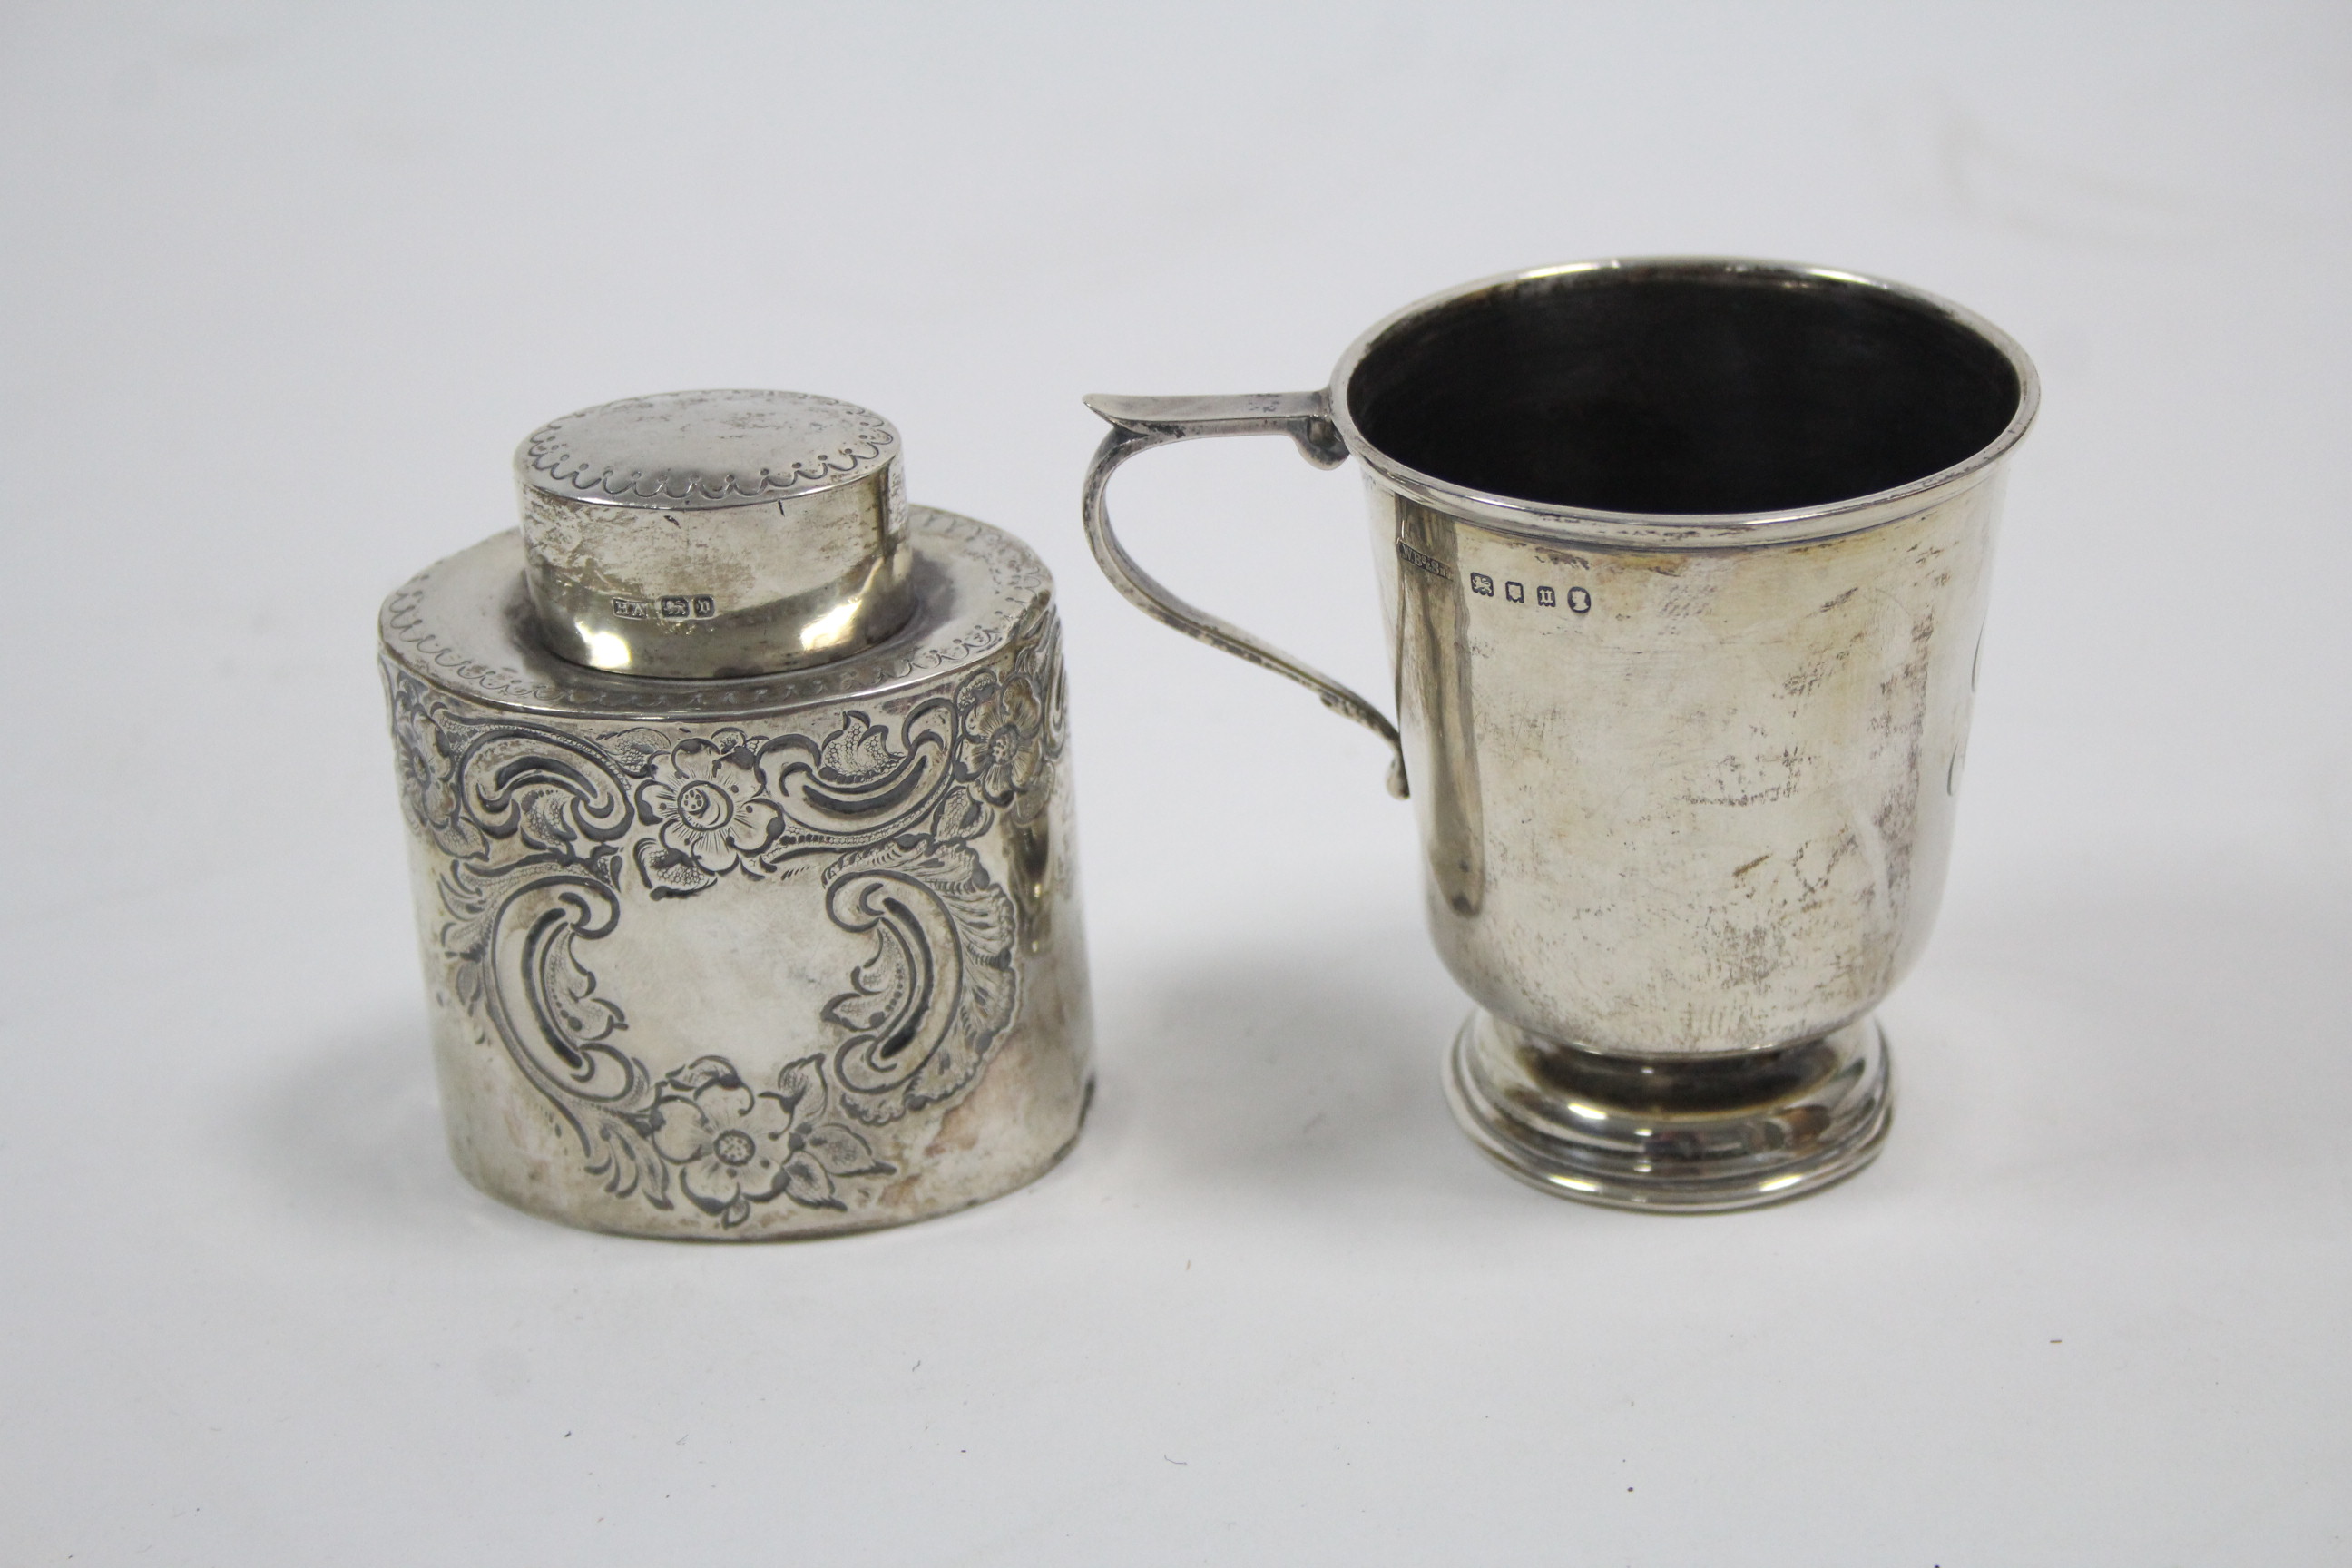 An Edwardian small silver oval teapoy with raised scroll & floral design, 2¾" high, Sheffield